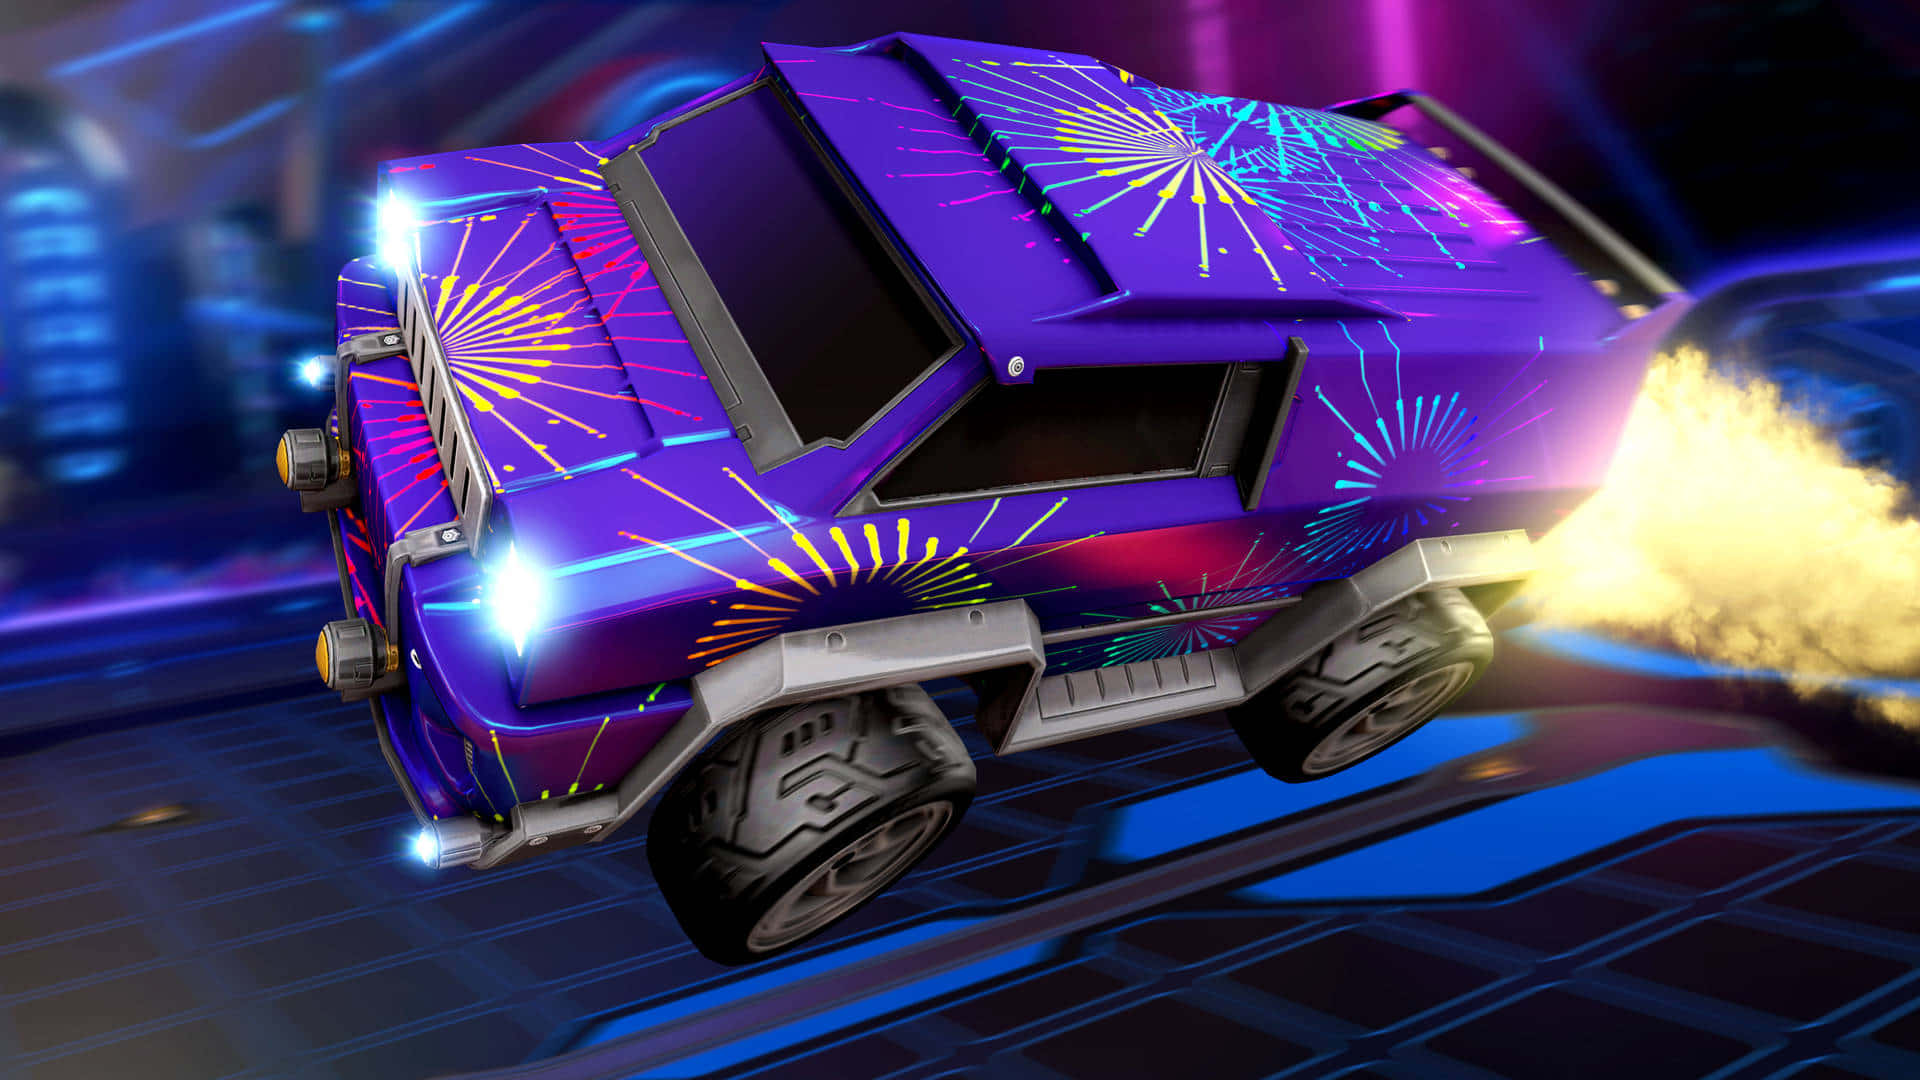 Step on the pitch and show your prowess in Rocket League